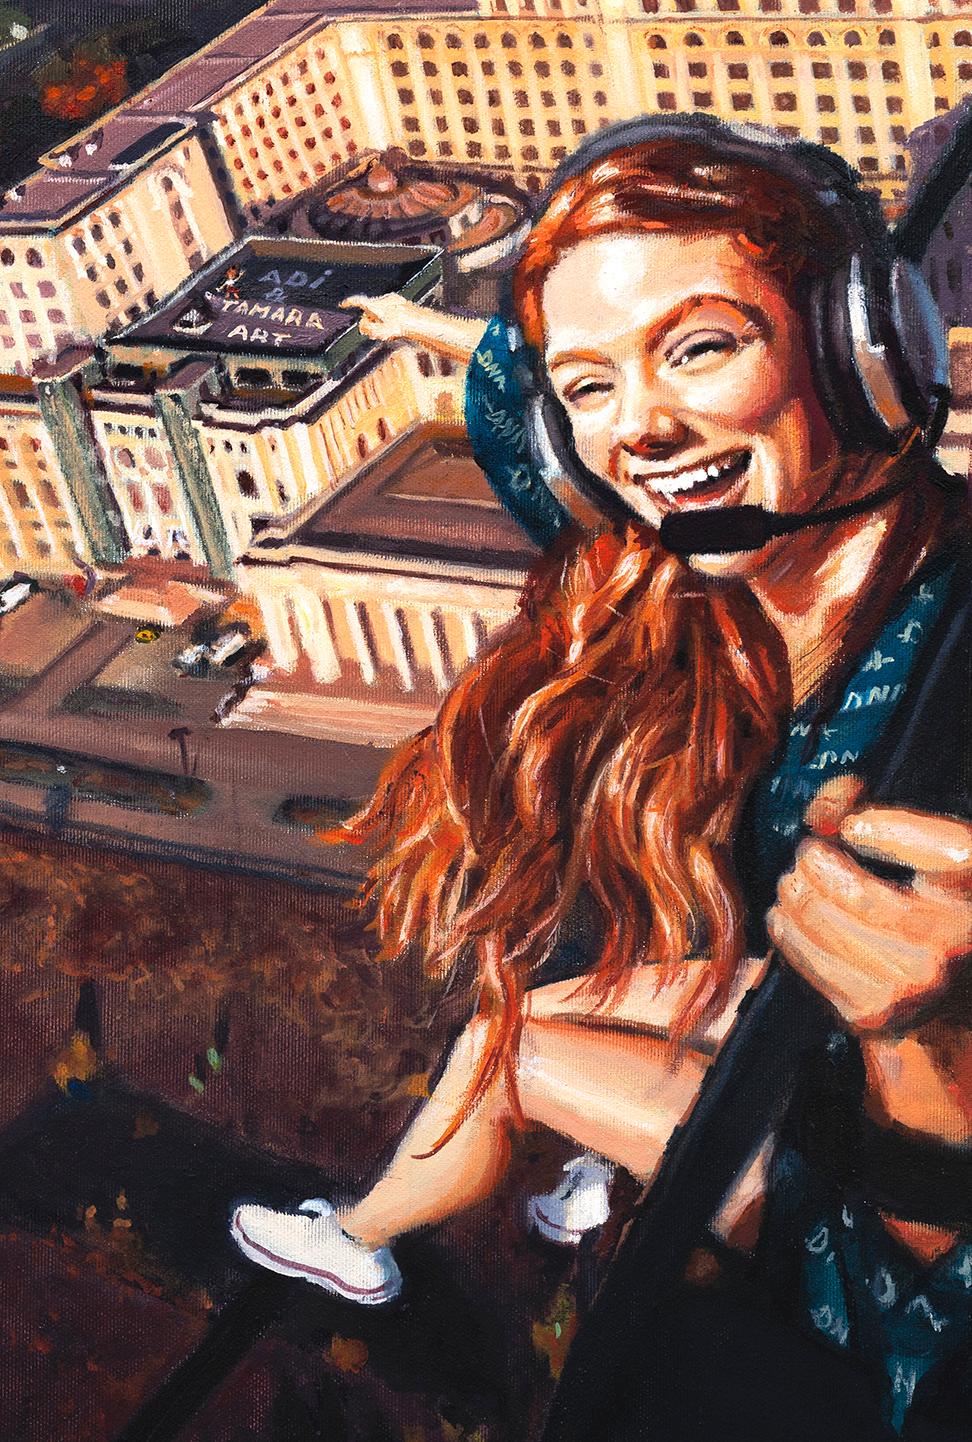 View From Heaven - Contemporary, Cityscape, Fun, Laughter, Woman, Figurative Art - Painting by Mihai Florea